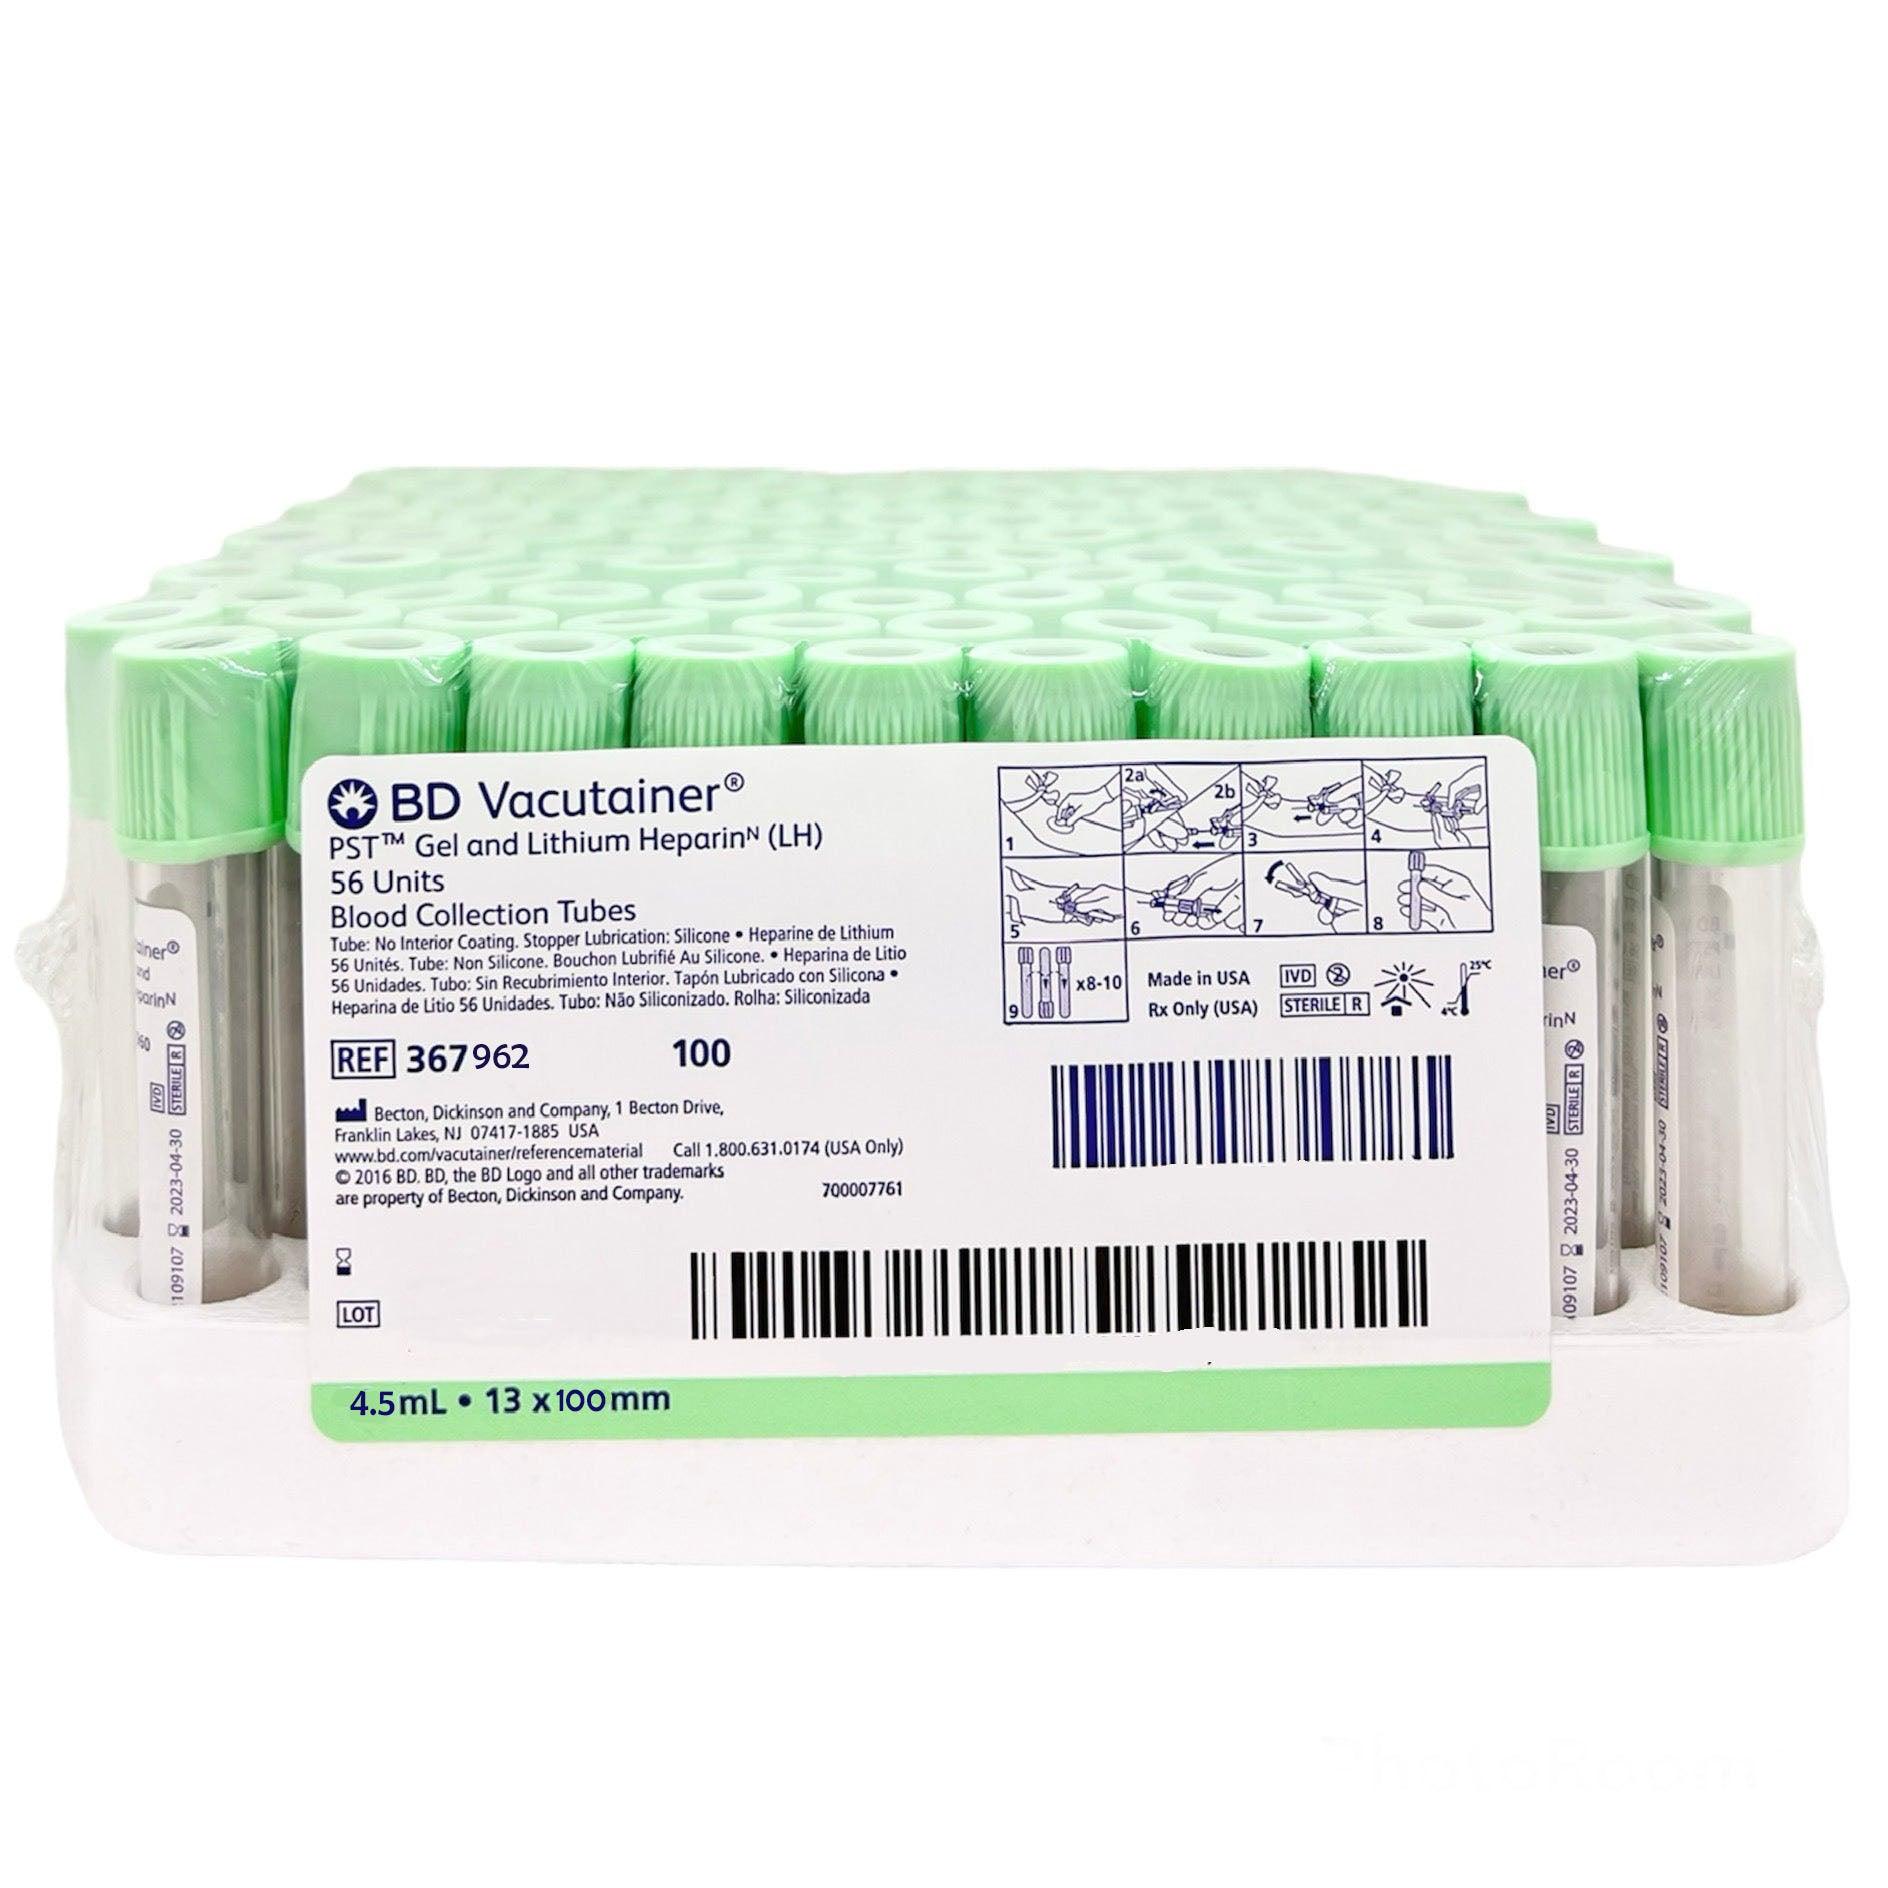 BD Vacutainer Blood Collection Serum Tubes - 367962 - Silicone Coated - Box of 100